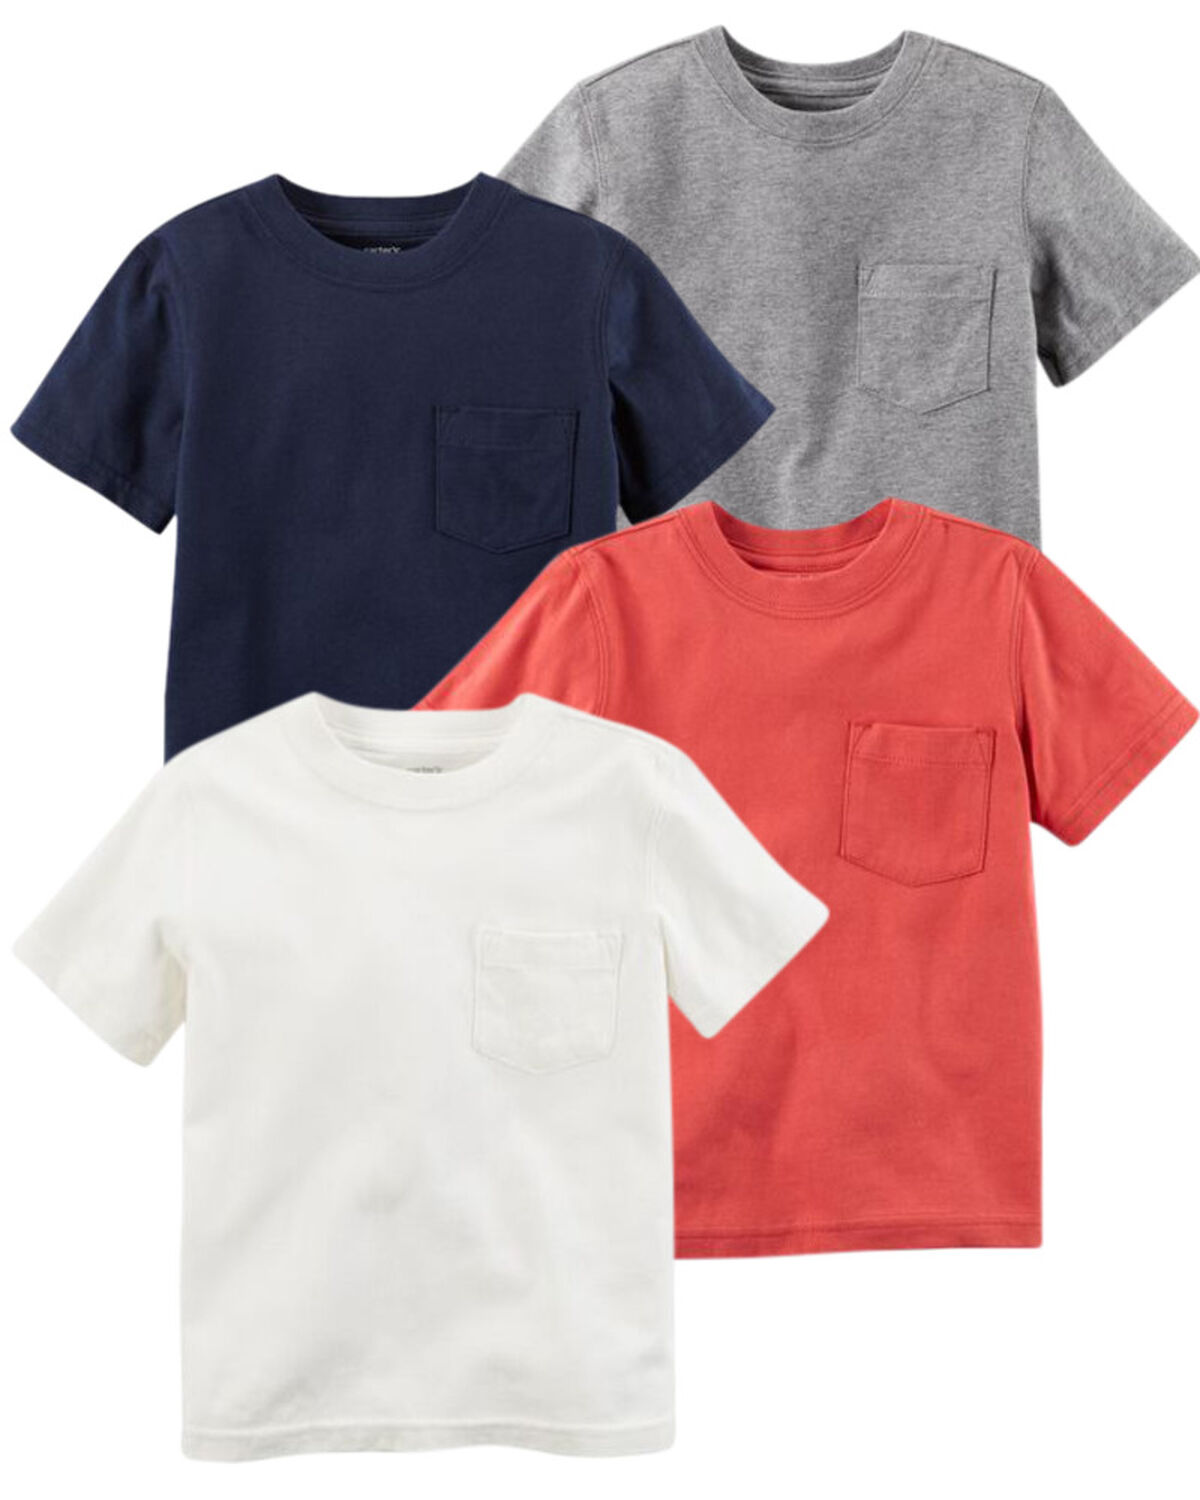 Toddler 4-Pack Everyday Cotton T-Shirt Set